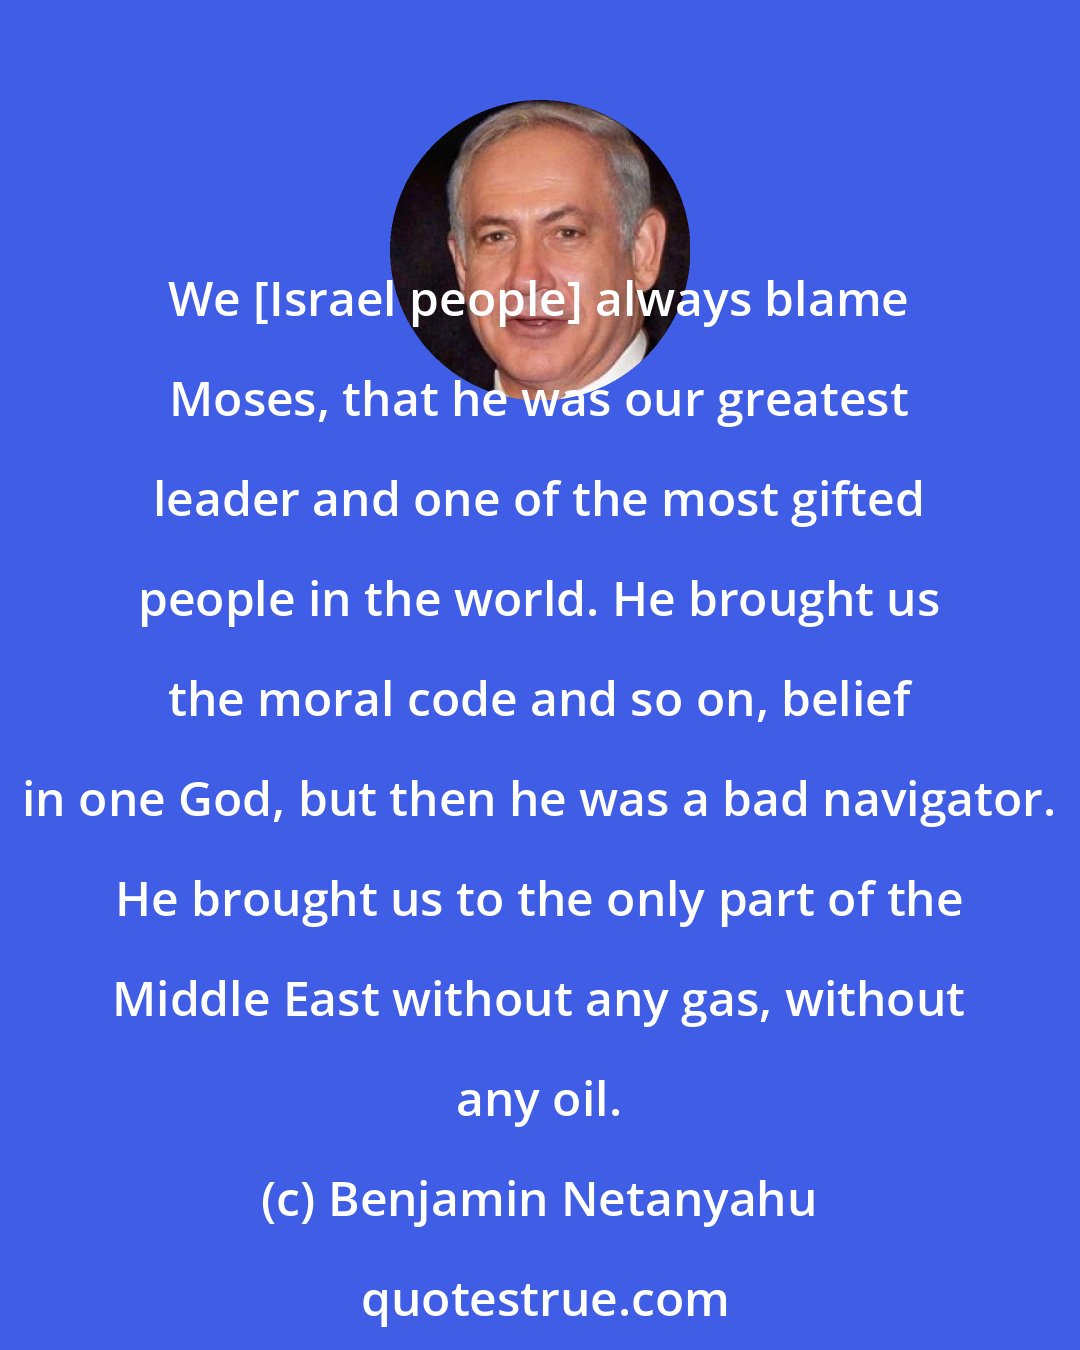 Benjamin Netanyahu: We [Israel people] always blame Moses, that he was our greatest leader and one of the most gifted people in the world. He brought us the moral code and so on, belief in one God, but then he was a bad navigator. He brought us to the only part of the Middle East without any gas, without any oil.